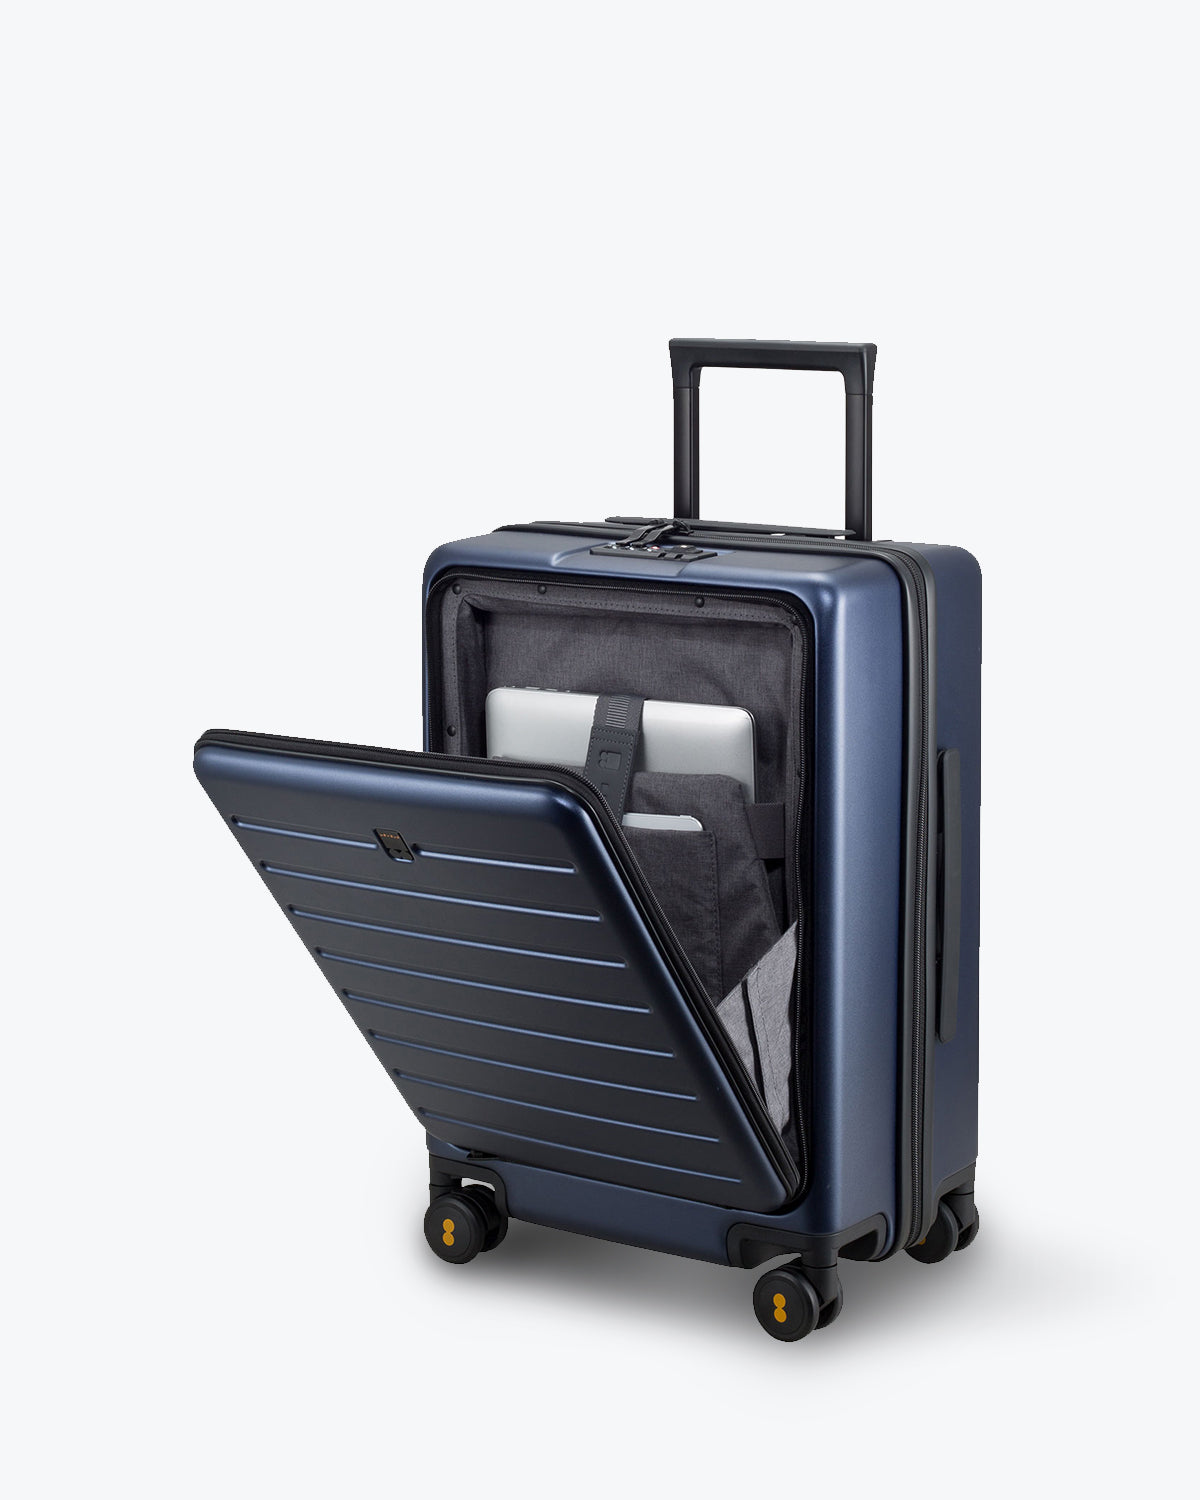 Cabin-size Luggage, High-end Hardshell Carry-on Suitcases